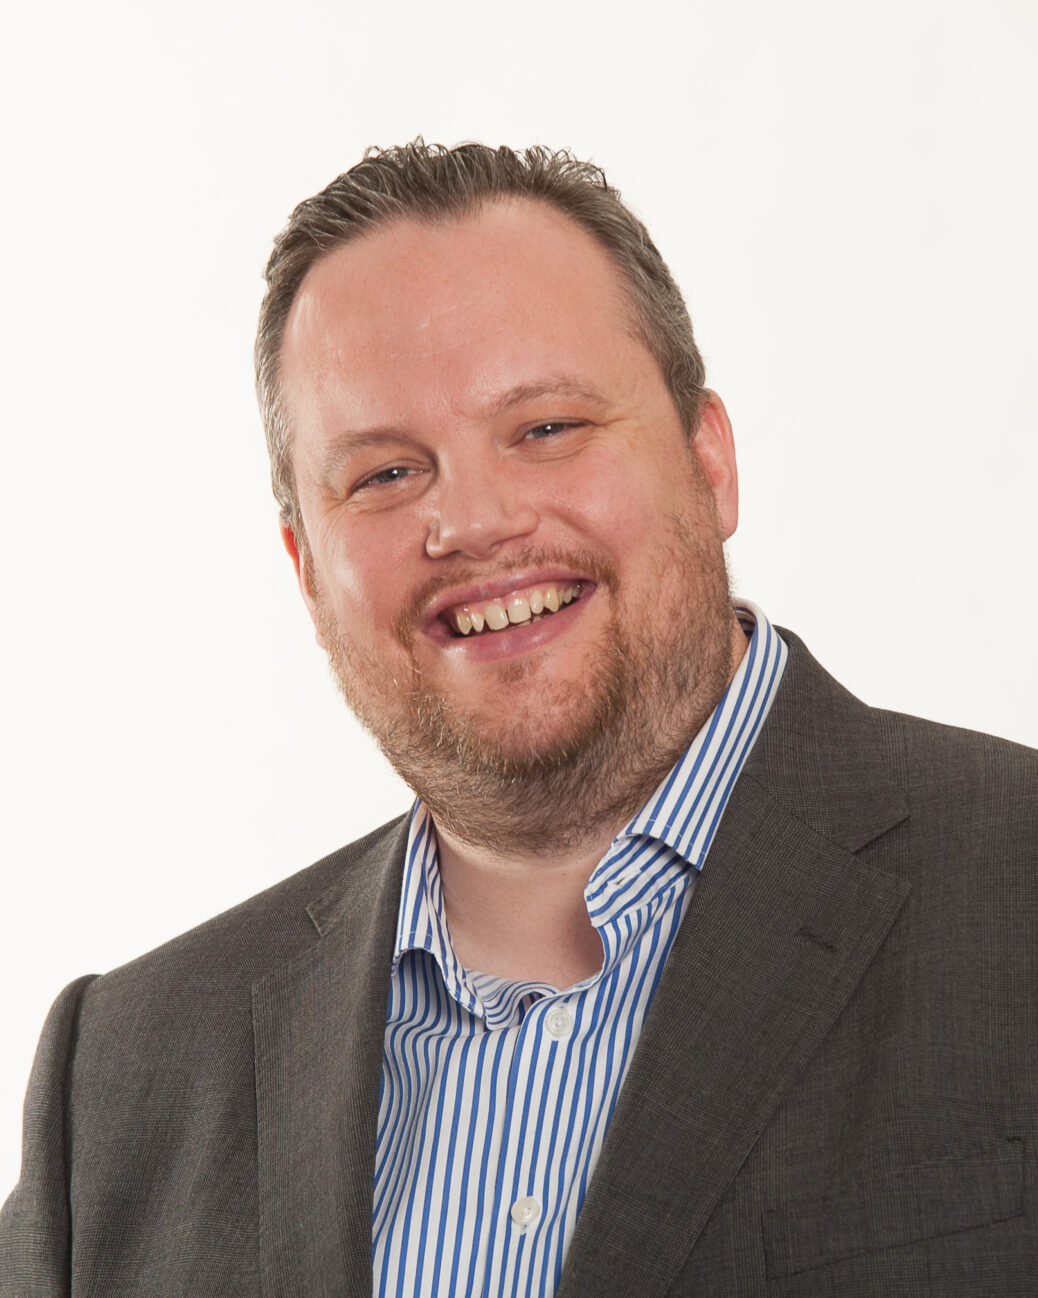 James Brayshaw, CEO of Southport-based AdaptiveComms